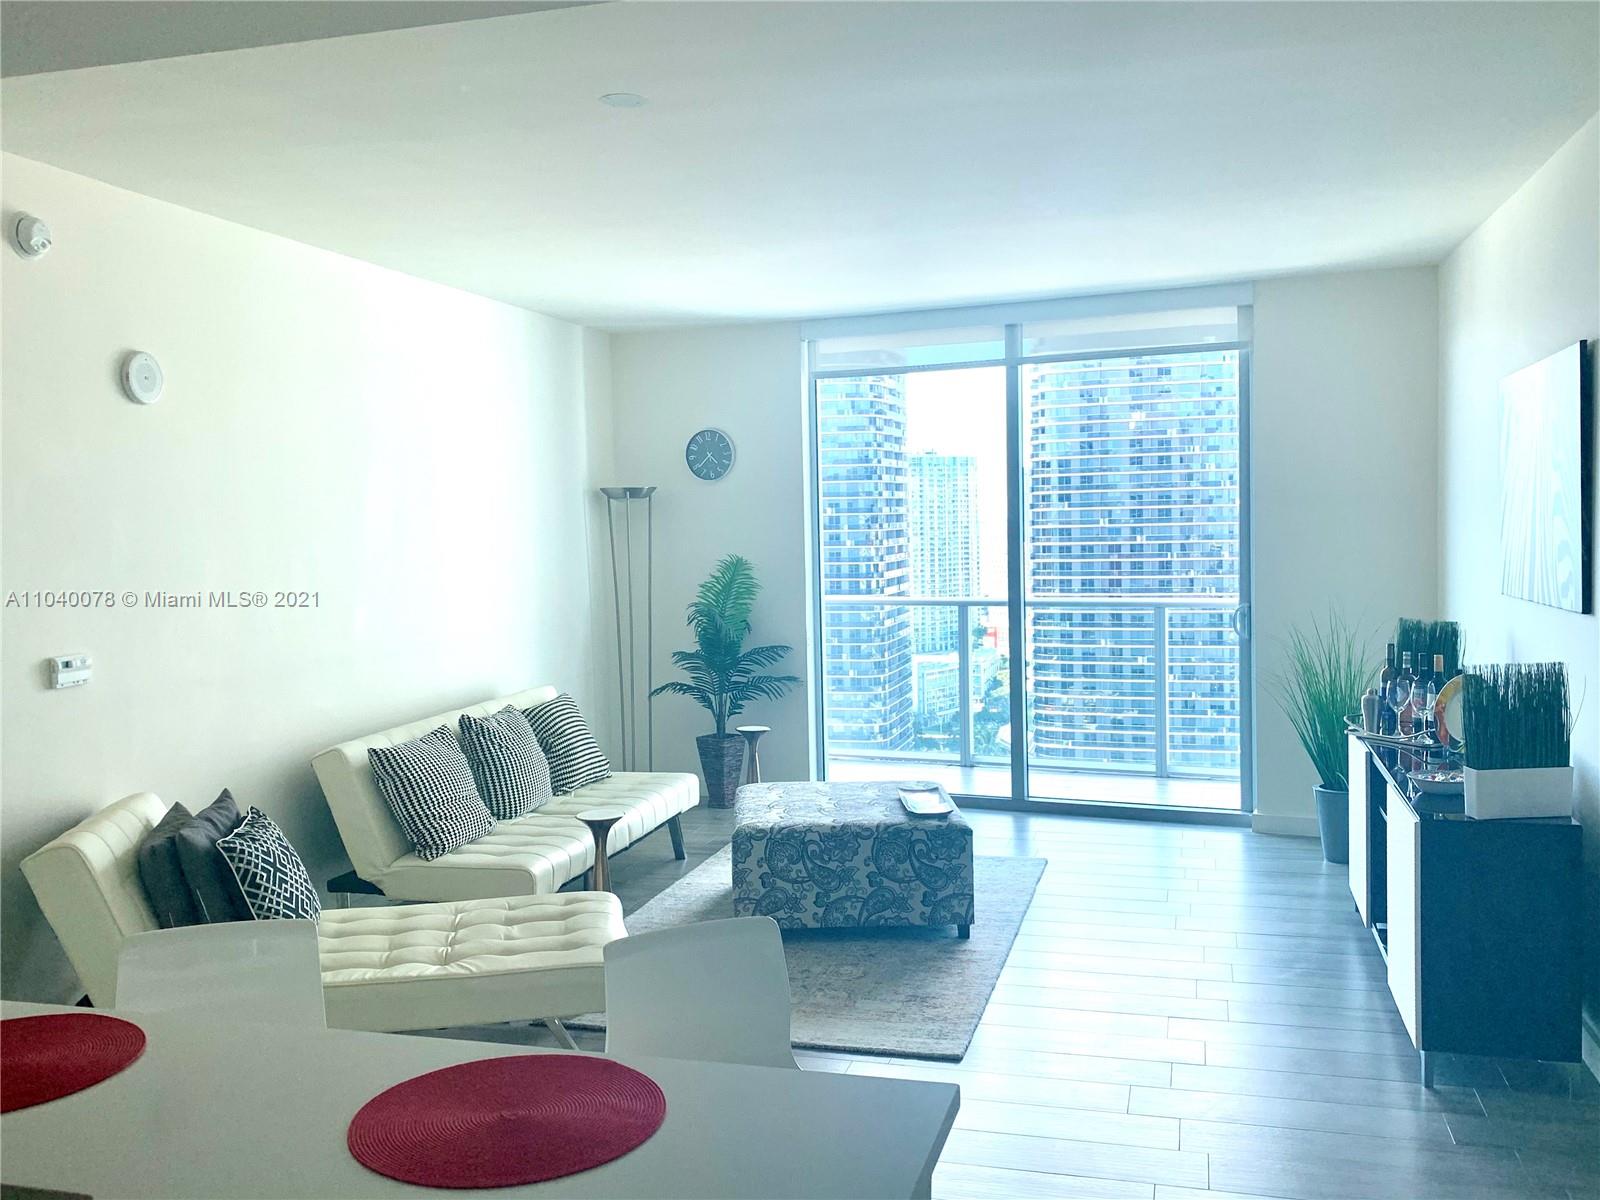 BEAUTIFUL, MODERN AND POSSIBLY TURNKEY FURNISHED 1 BEDROOM AND 1 BATH AT MILLECENTO. THIS UNIT ORIGINALLY CAME WITH A PREMIUM PACKAGE INCLUDING UPGRADES FROM THE DEVELOPER! (STUNNING TILES EVERYWHERE, A WALK-IN CLOSET AND WINDOWS SHADES).  IT IS THE HIGHEST 09 LINE UNIT CURRENTLY AVAILABLE ON THE MARKET. 
ITS LARGE BALCONY OVERLOOKS BRICKELL'S CENTER OF ACTION INCLUDING THE ENTIRE MARY BRICKELL VILLAGE AND HAS SUPERB CITY VIEWS YOU DO NOT WANT TO MISS. The building is located in the heart of Brickell, steps from all restaurants, shops and entertainment venues of Mary Brickell Village and Brickell City Center. Steps away from the metro rail and 2 metro mover stations. Great amenities that include a rooftop pool, another pool on the 9th, a 24 Hour gym, a theater, lounge, kids room etc.